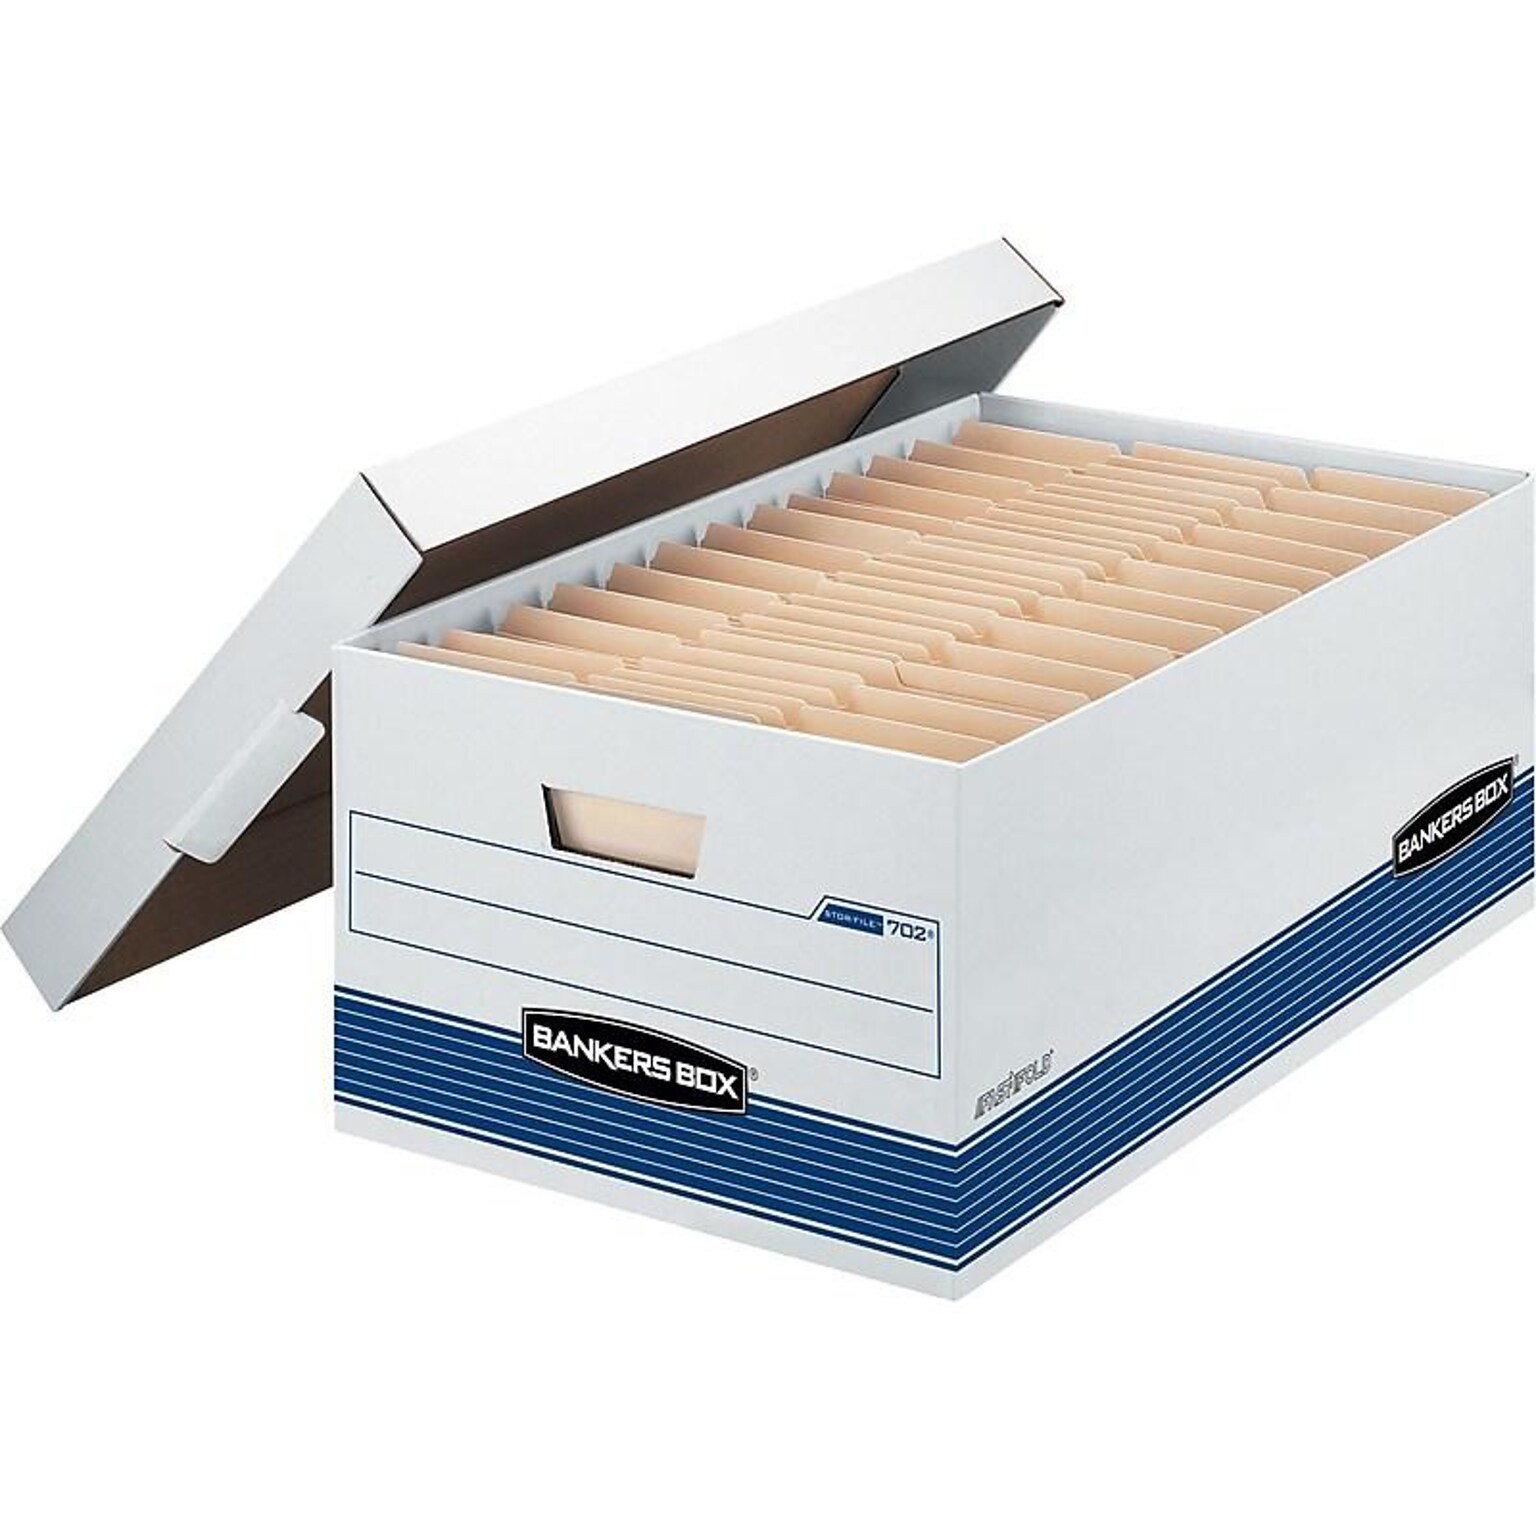 Bankers Box Medium-Duty FastFold Corrugated File Storage Boxes, 24 Lift-Off Lid, Legal Size, White/Blue, 12/Carton (00702)